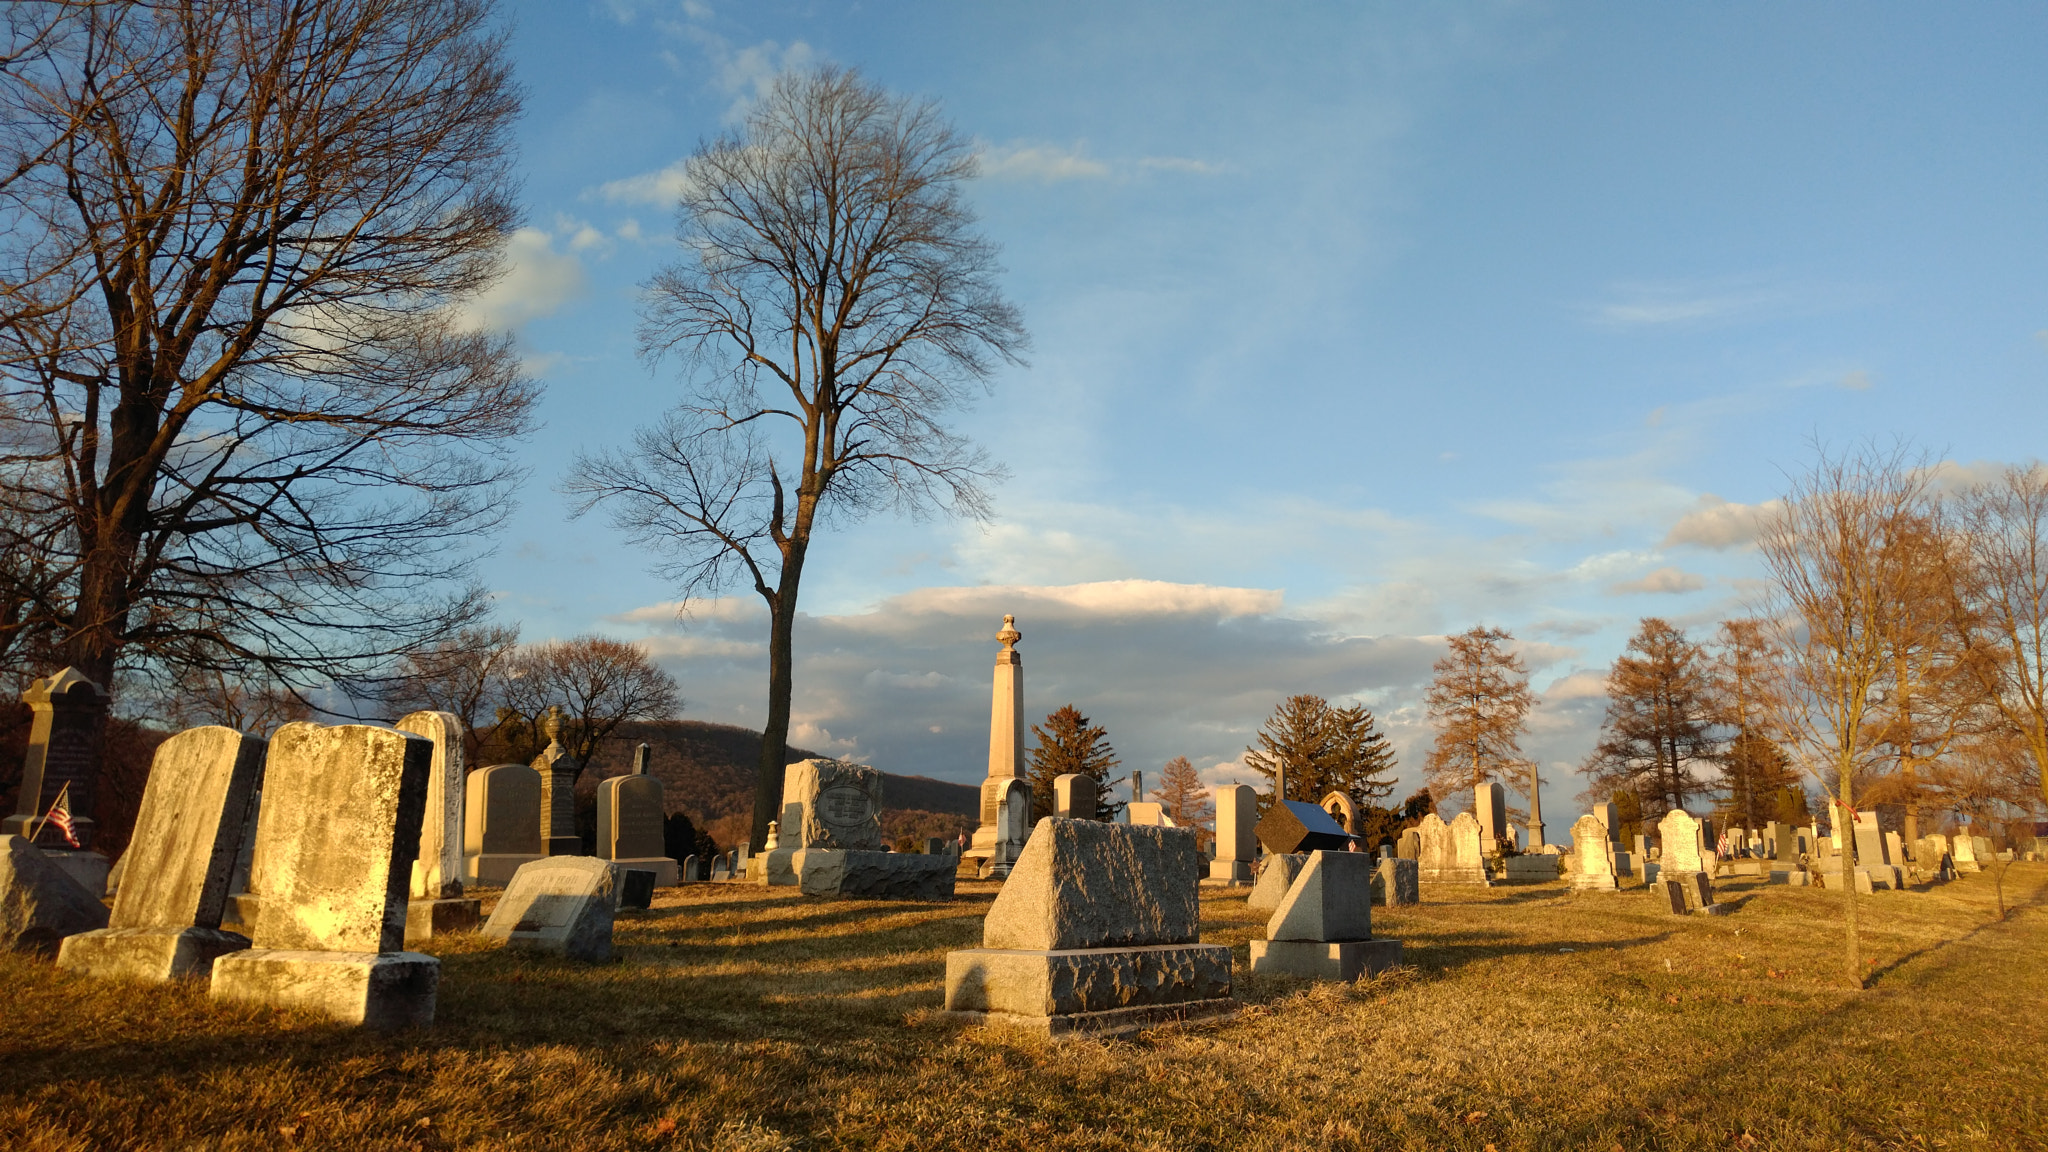 ZTE A2017U sample photo. The cemetery was bathed in golden light photography